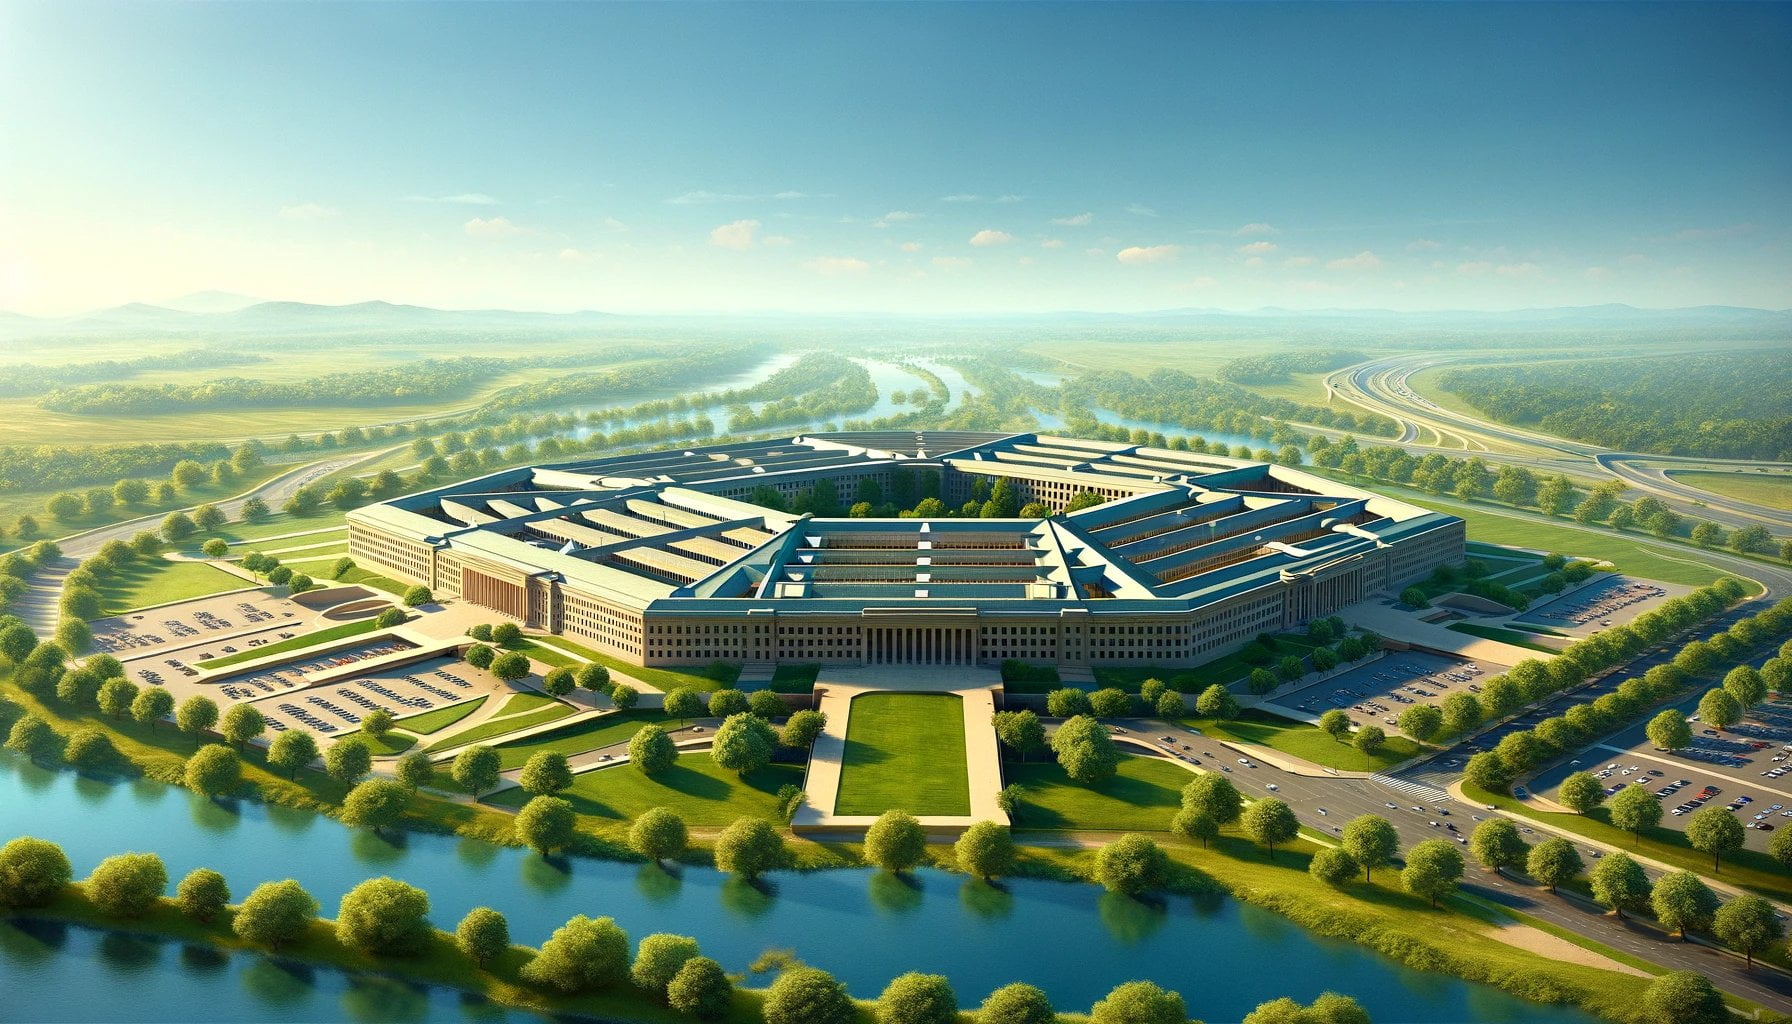 25 facts about the pentagon